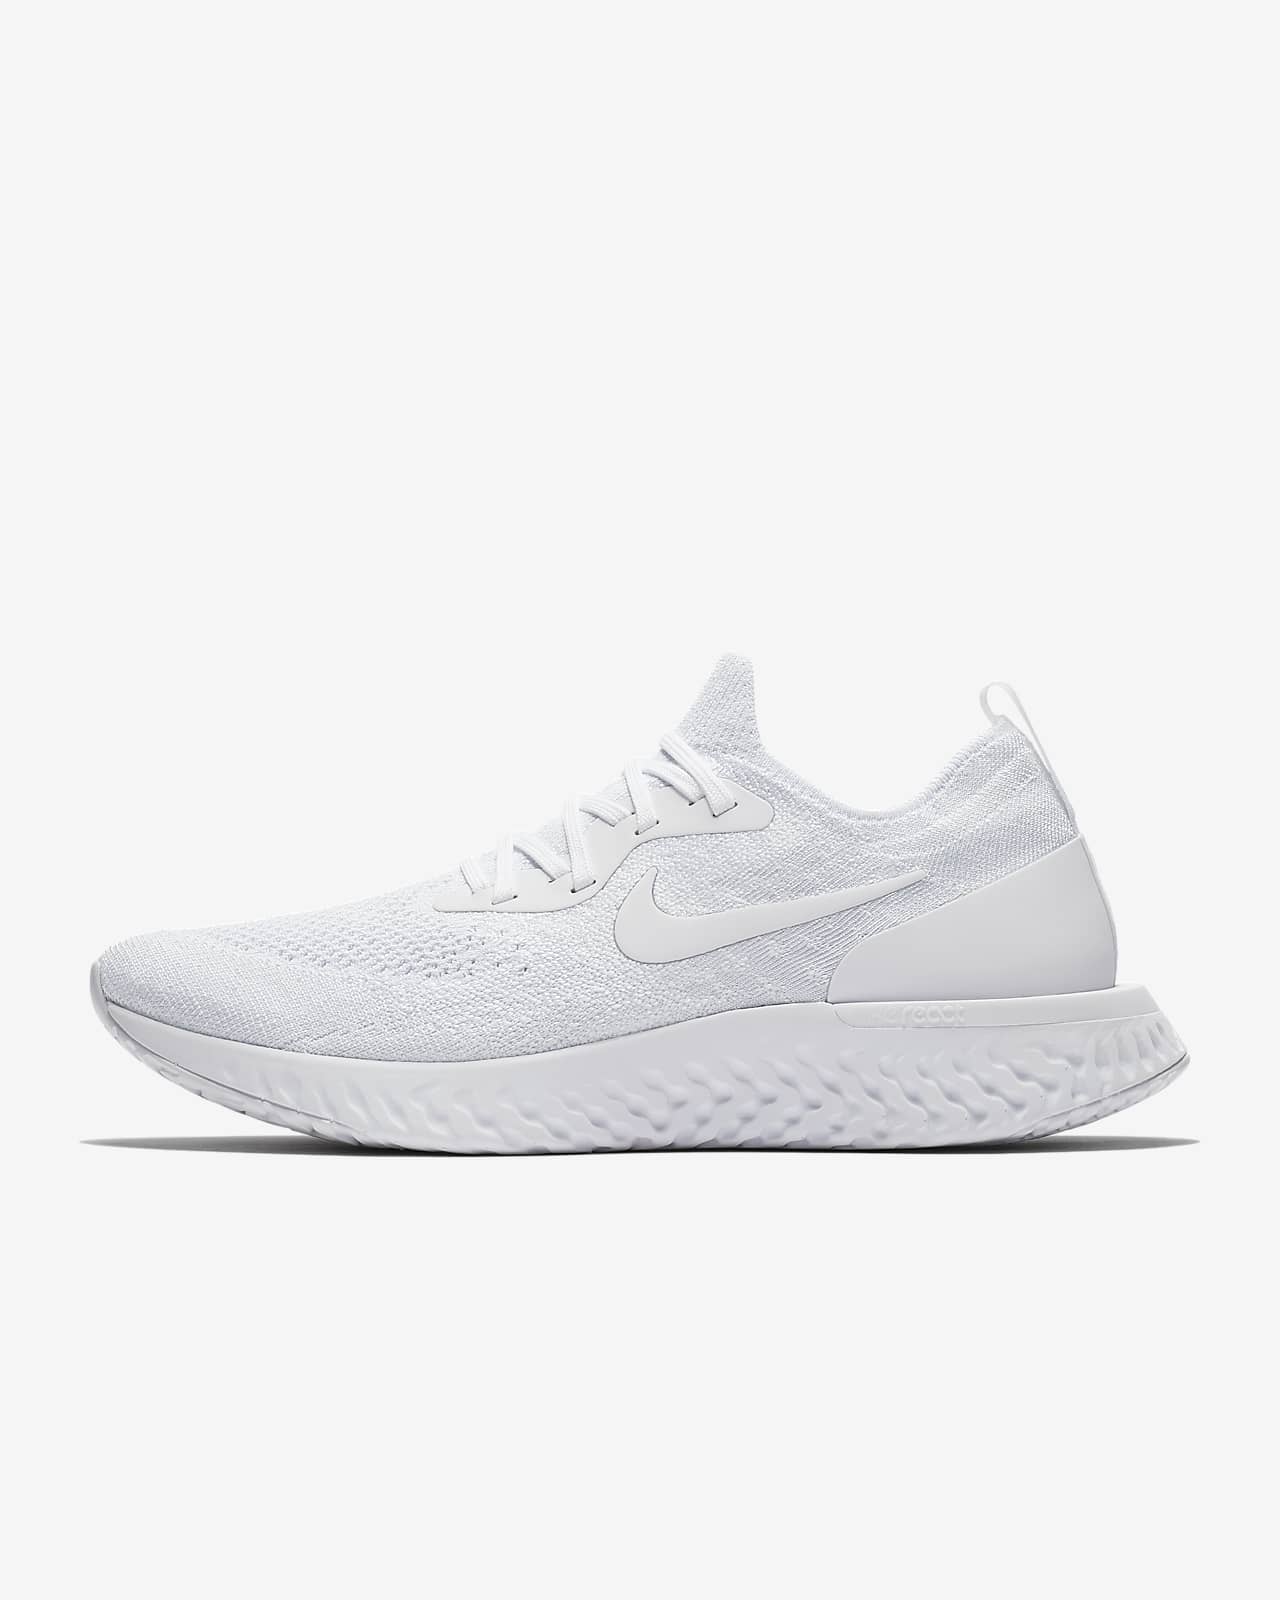 nike flyknit running shoes white